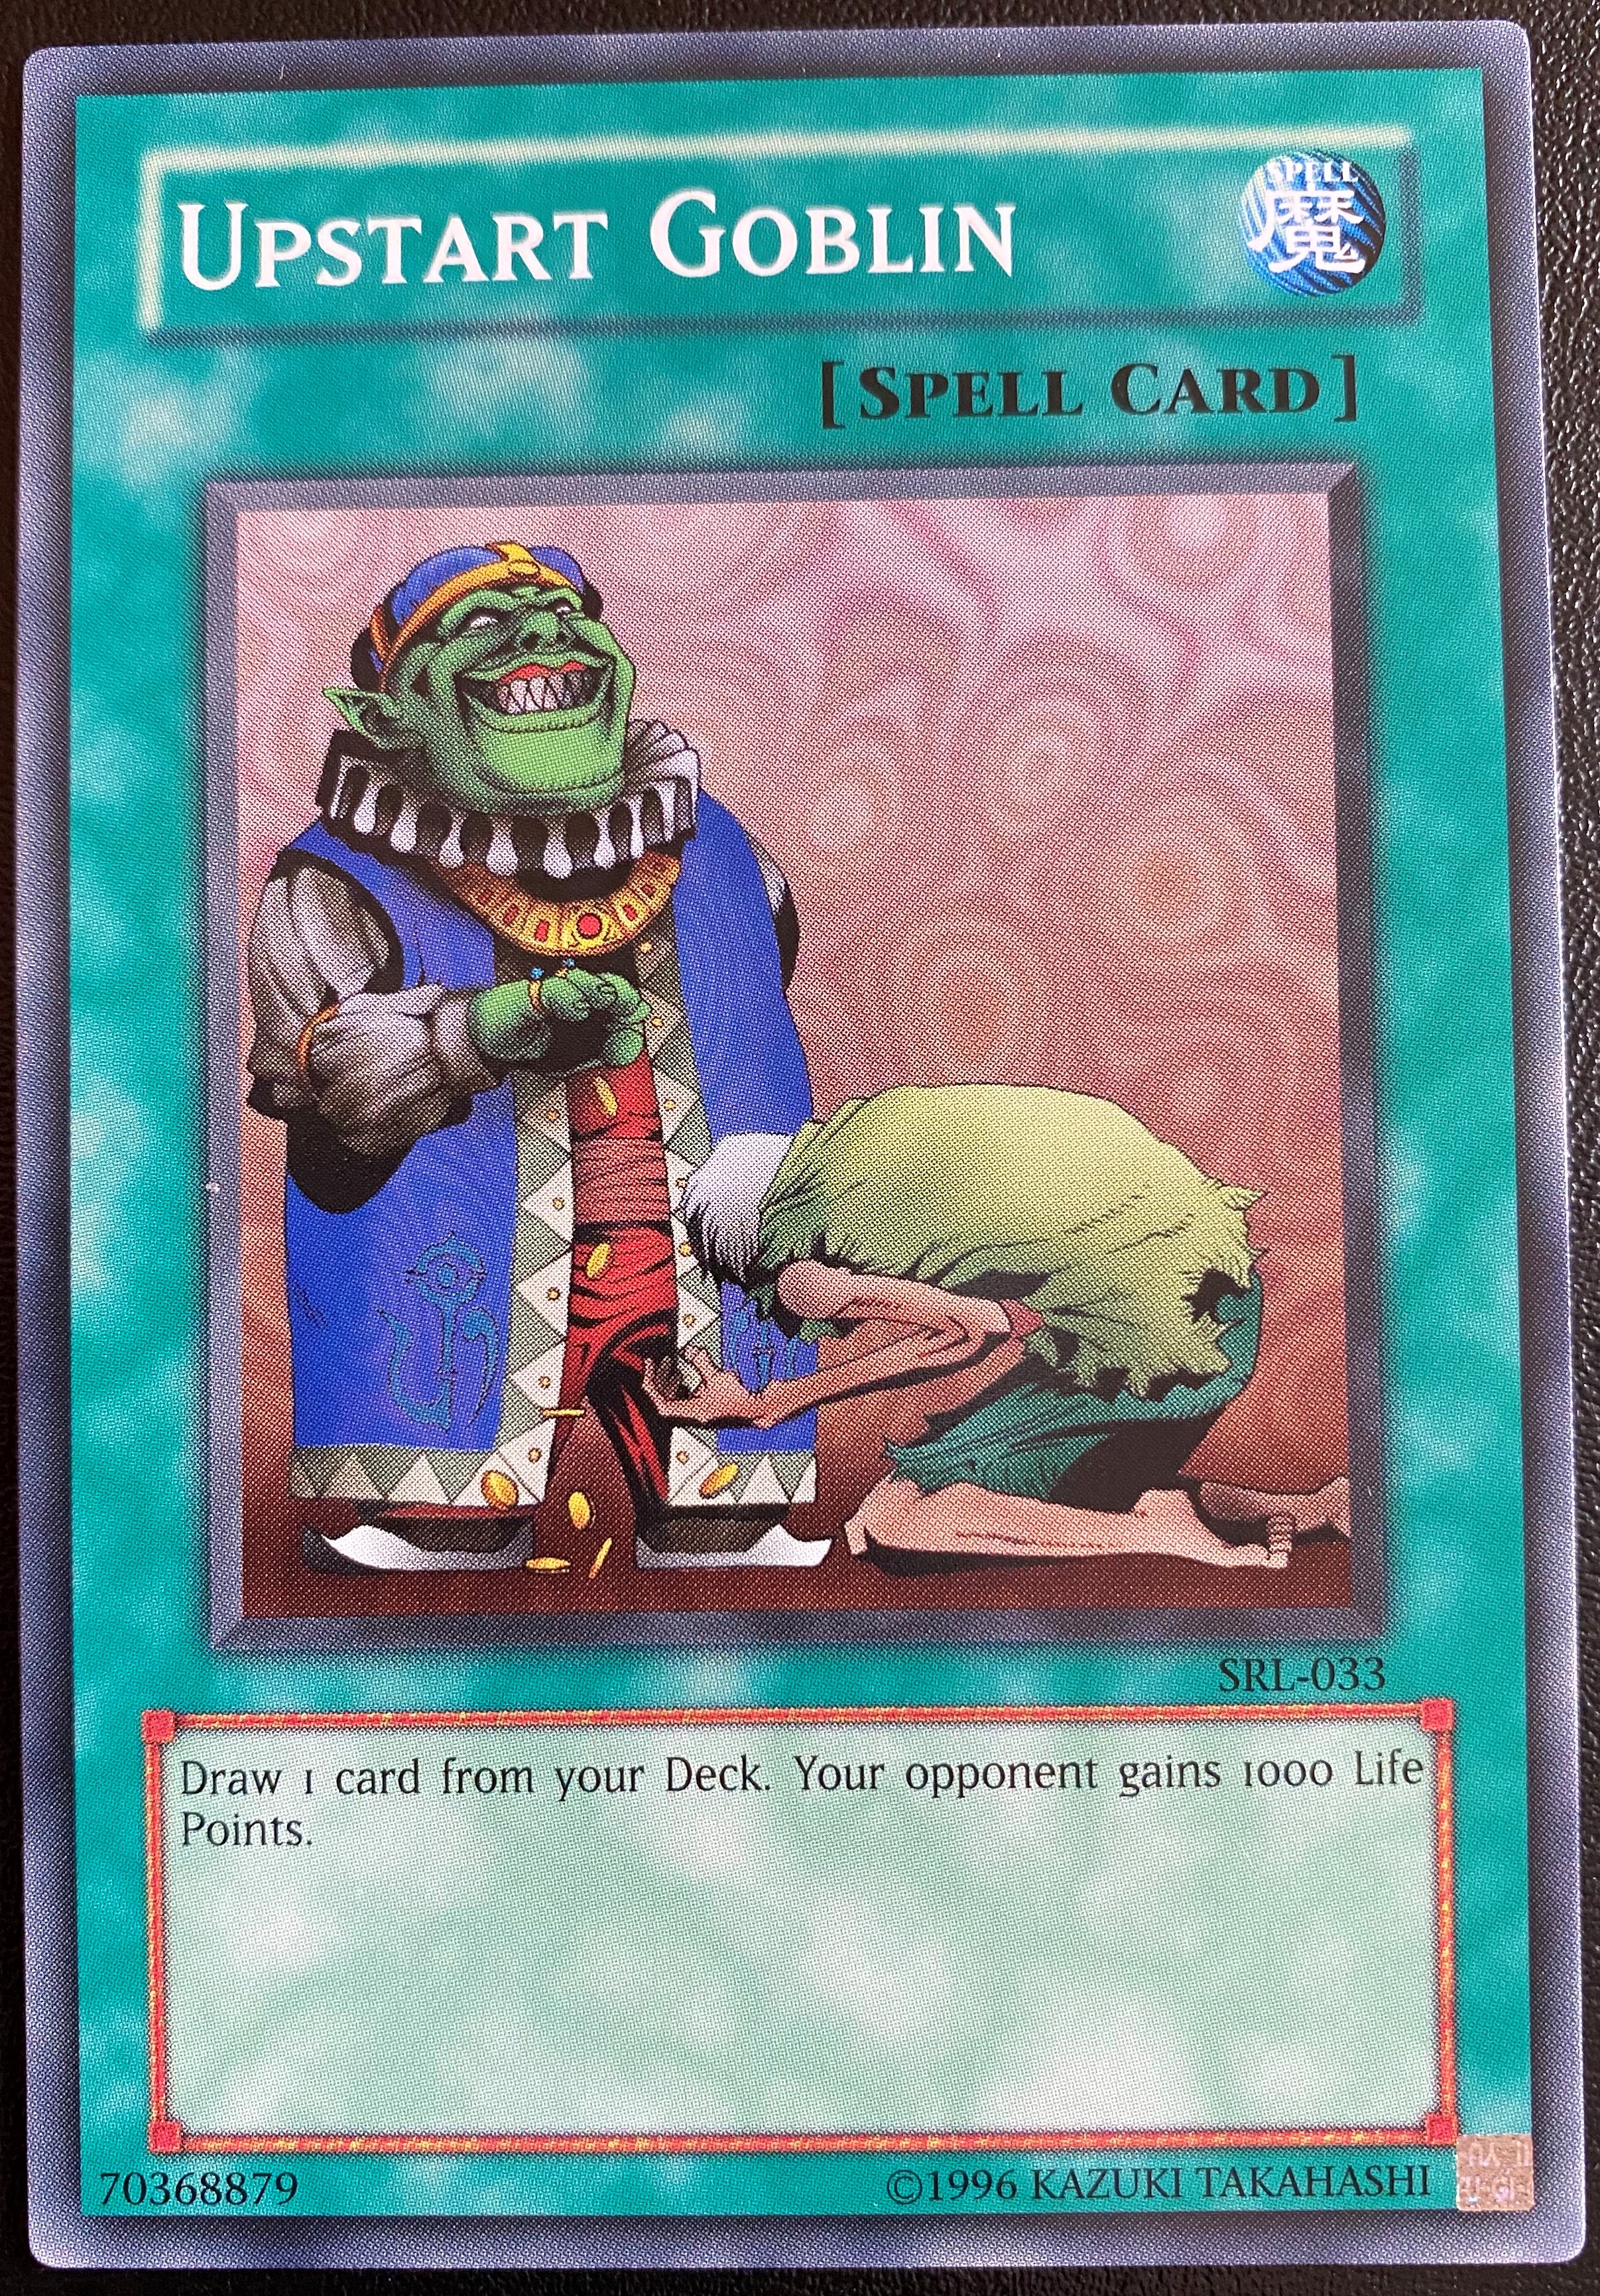 A Yu-Gi-Oh! card “Upstart Goblin” that thins the deck to up consistency, popularized very late after its creation.